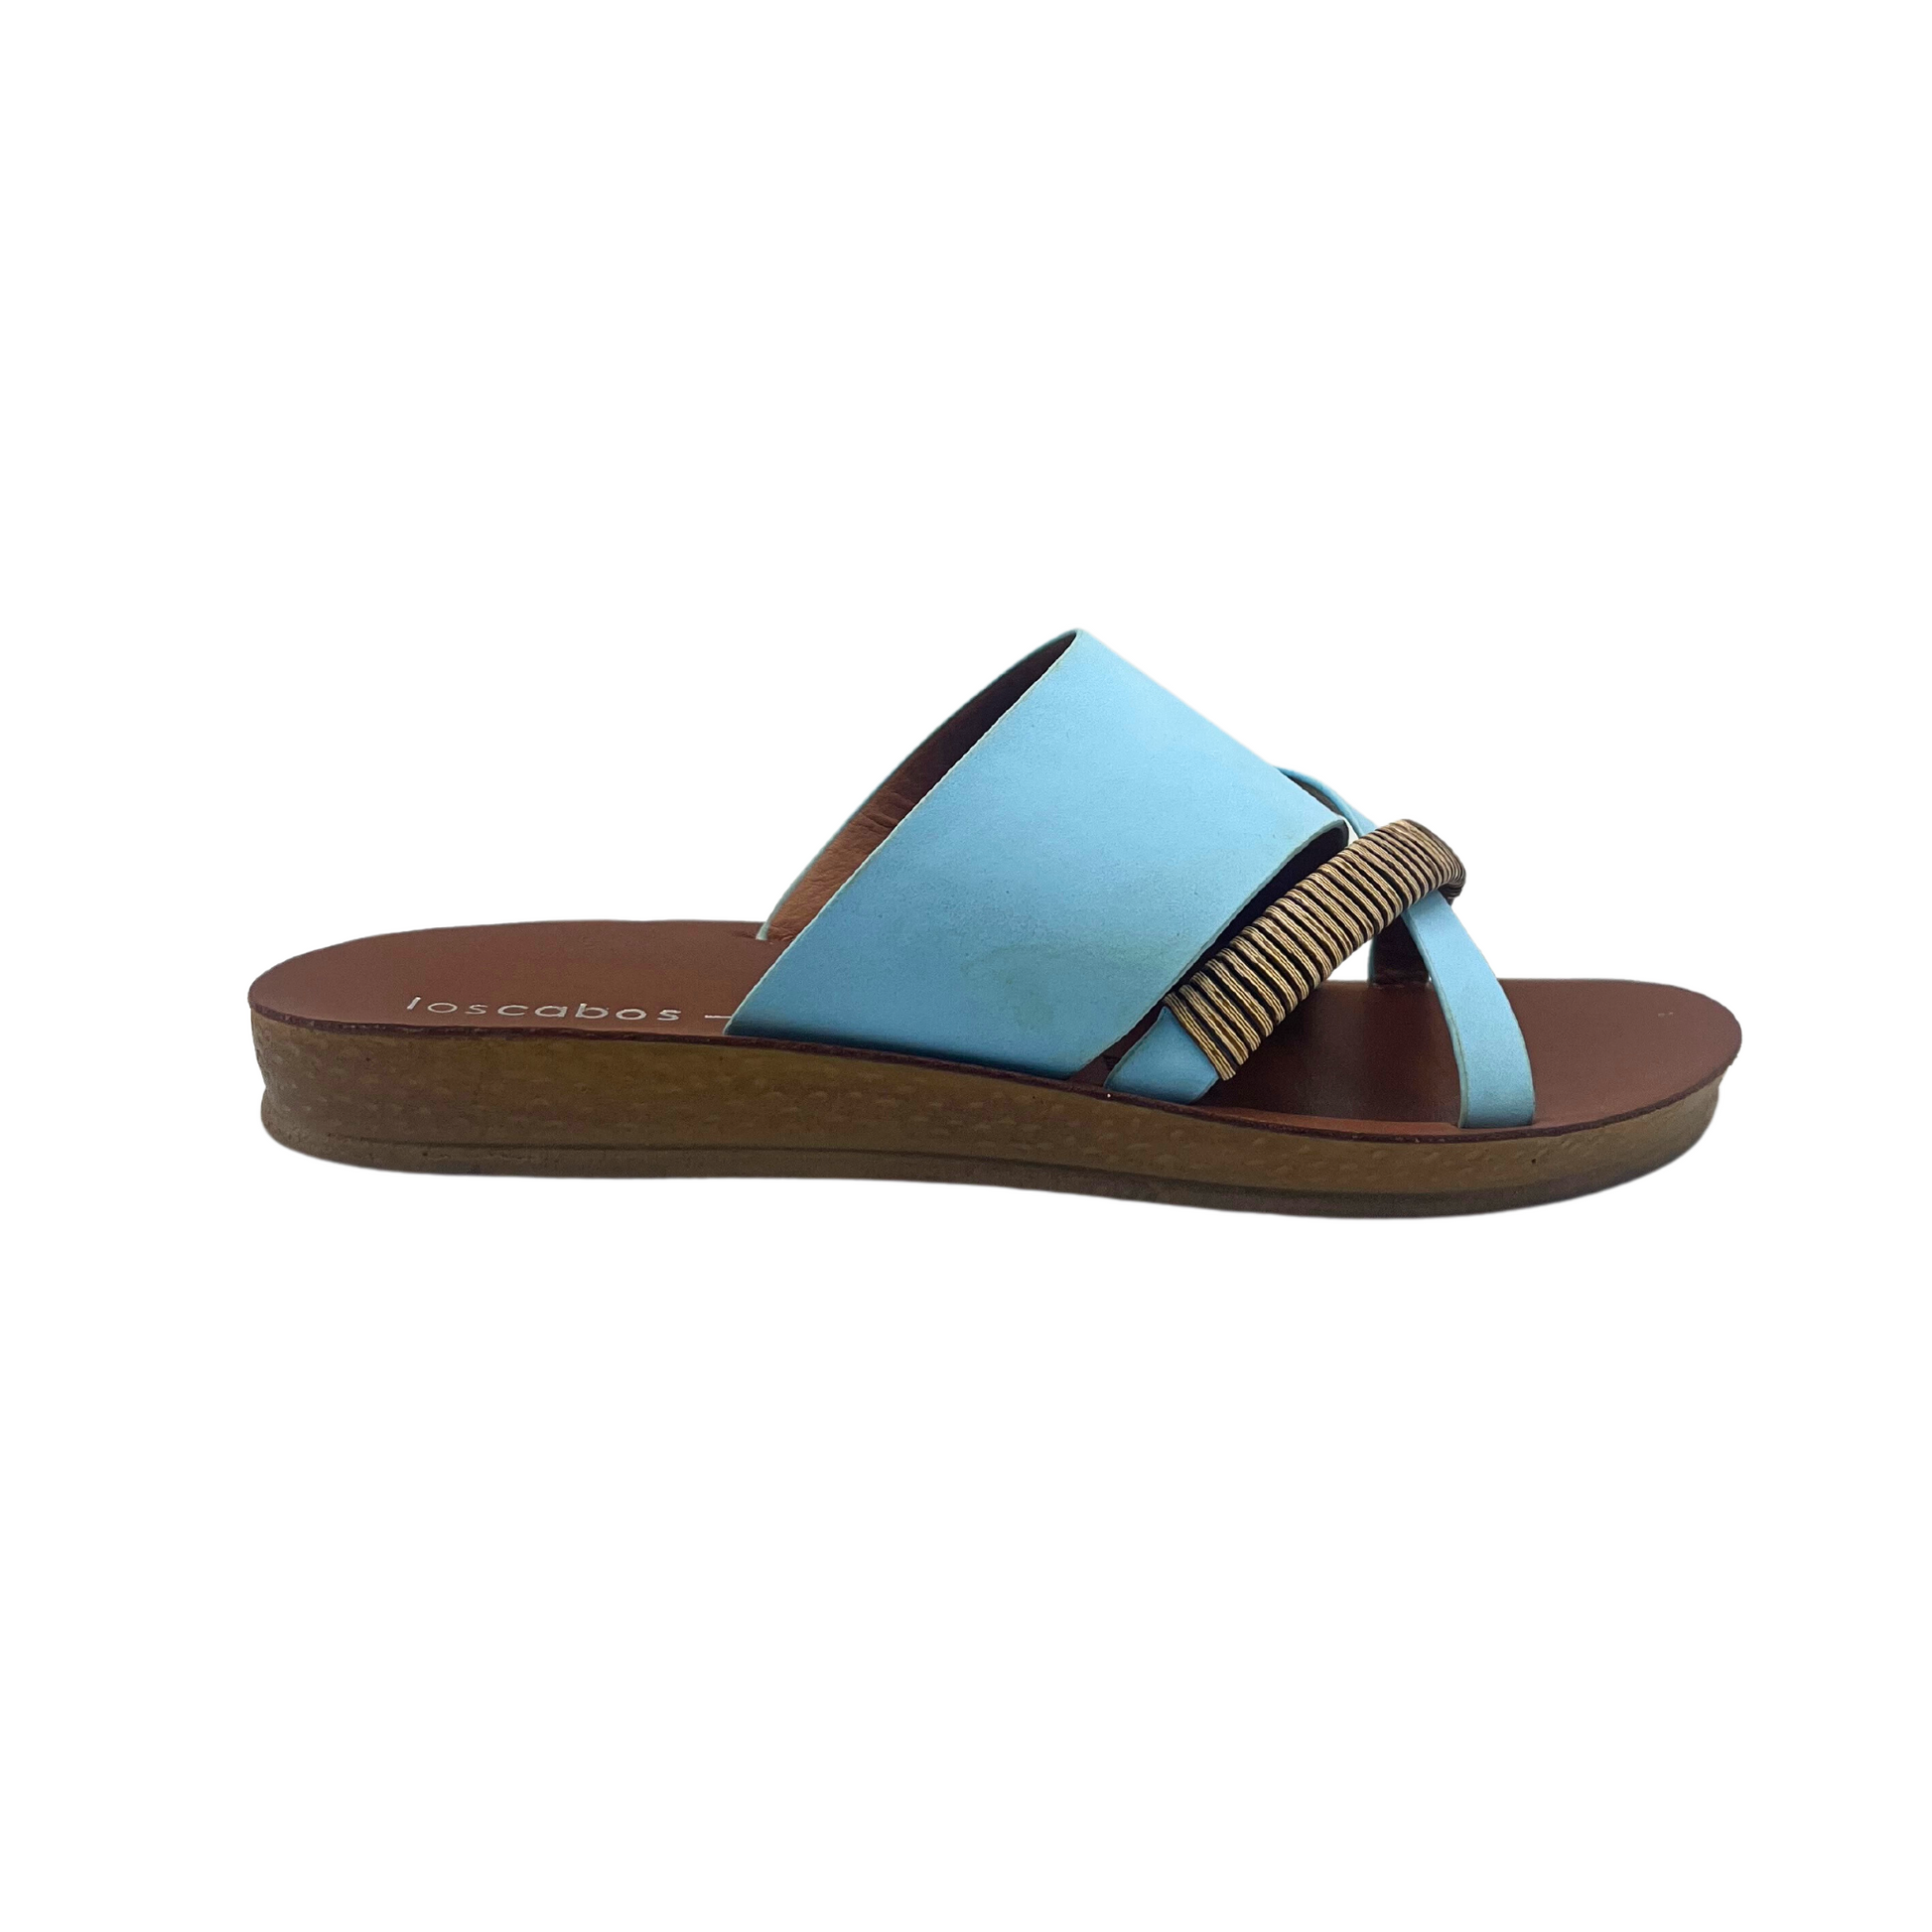 Outside view of a slip on sandal.  Open toe and heel.  Chalk blue leather